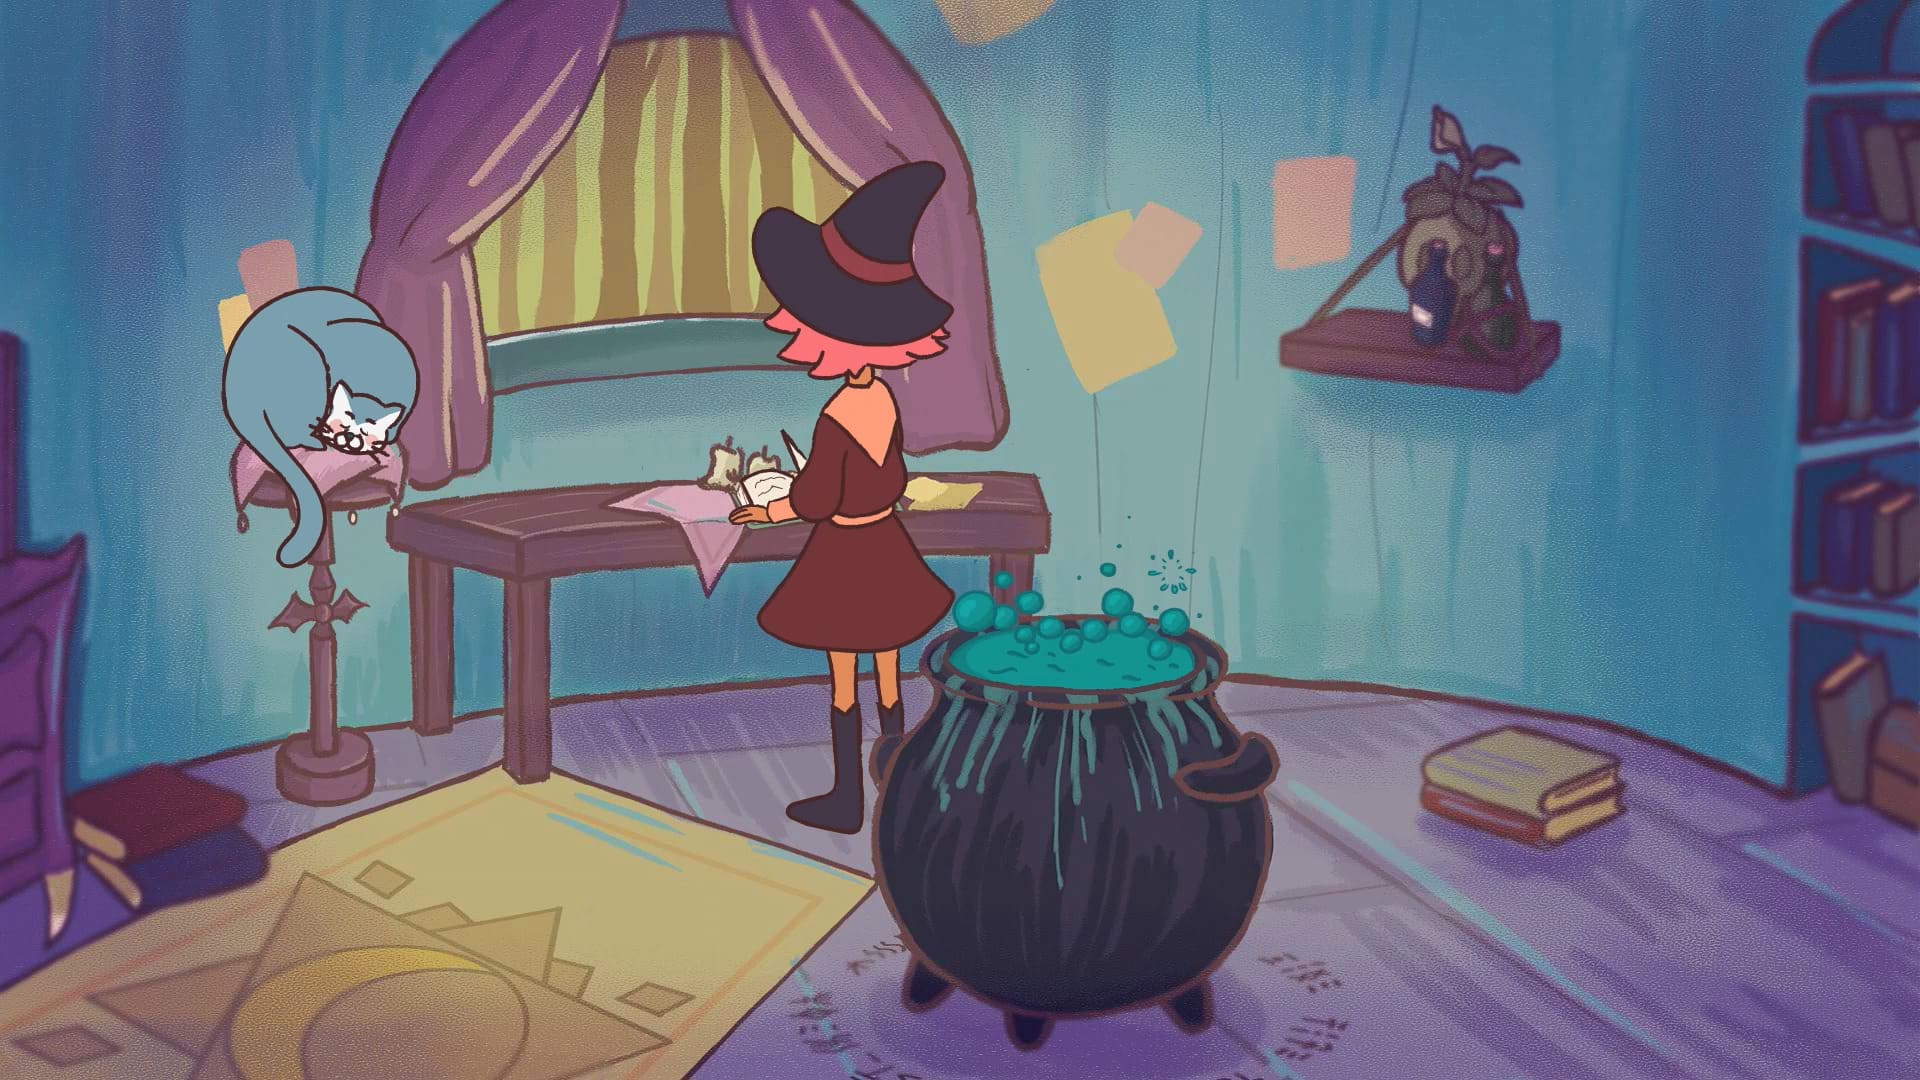 A young witch prepares a potion while her cat rests beside her.